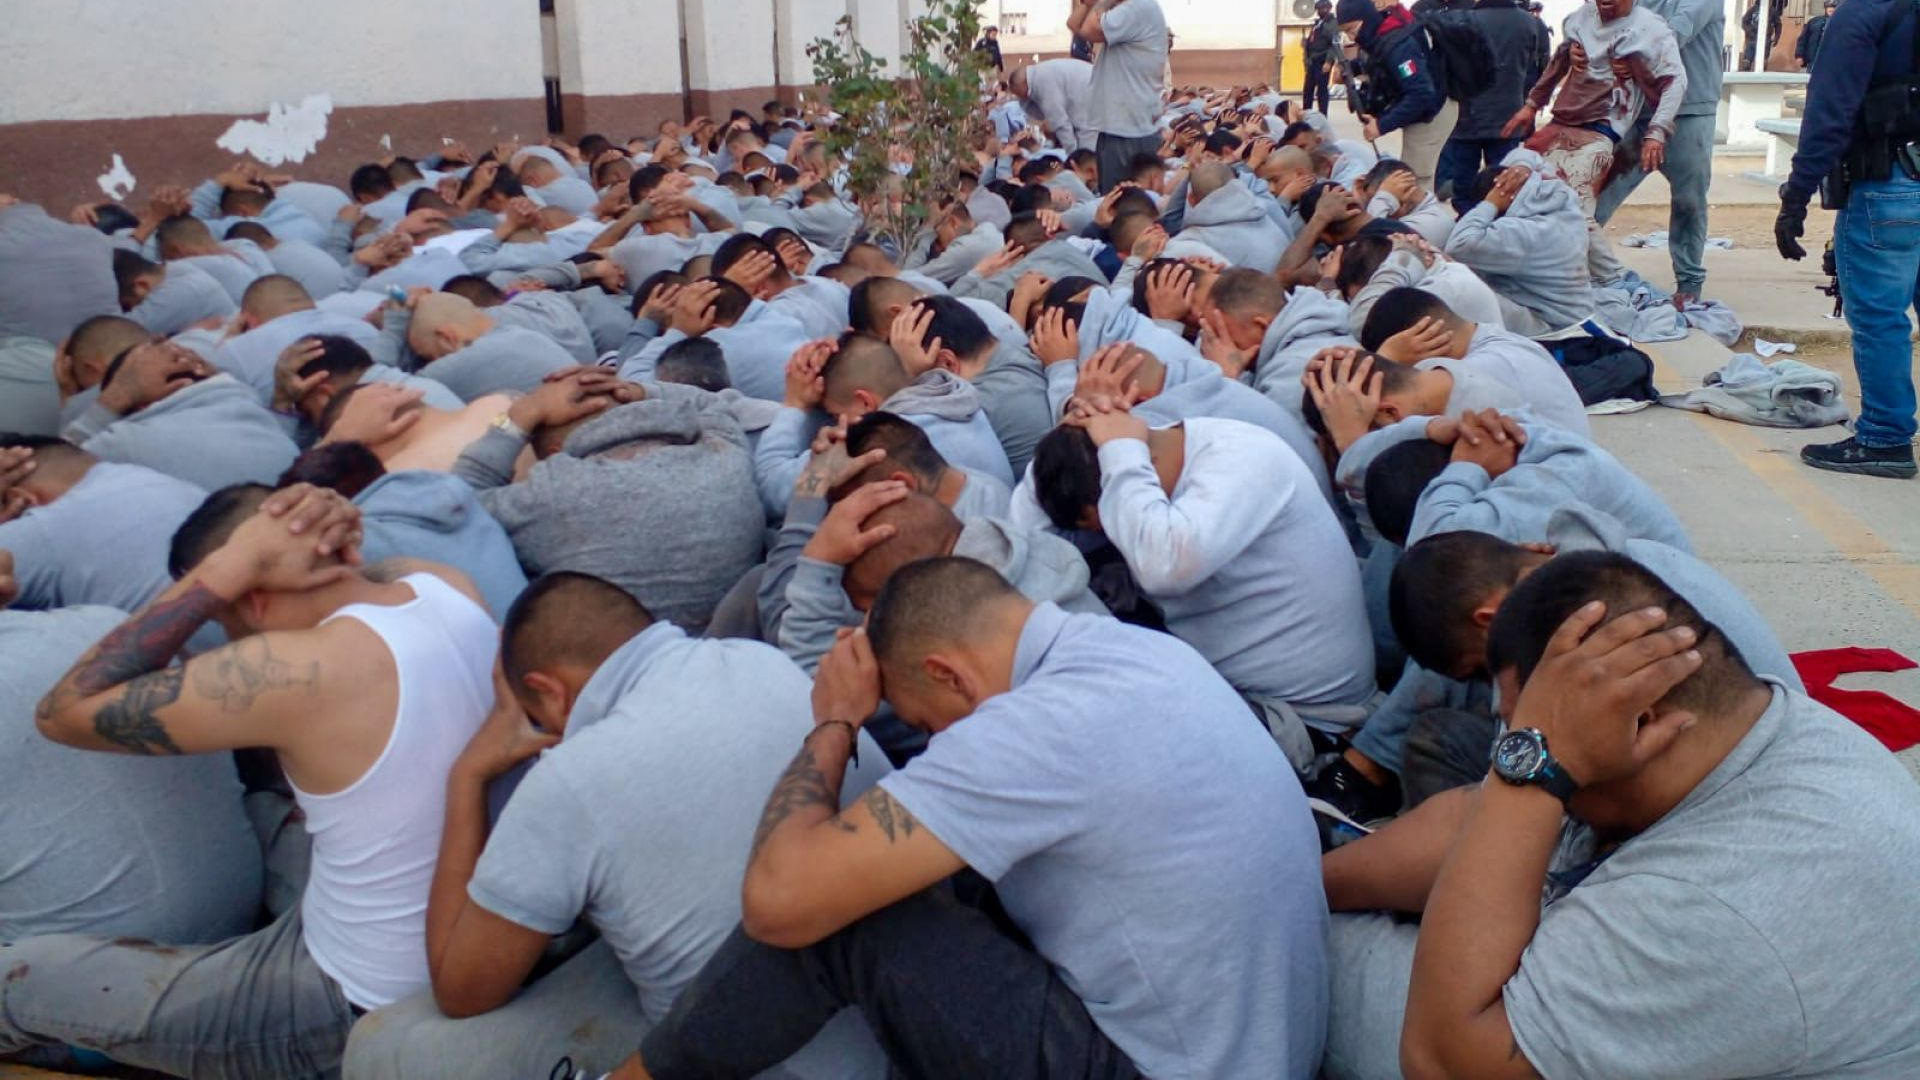 After the attack and escape of inmates in the Ciudad Juárez prison, Chihuahua, the authorities indicated that those responsible are being sought, regardless of their hierarchical level (Cuartoscuro)